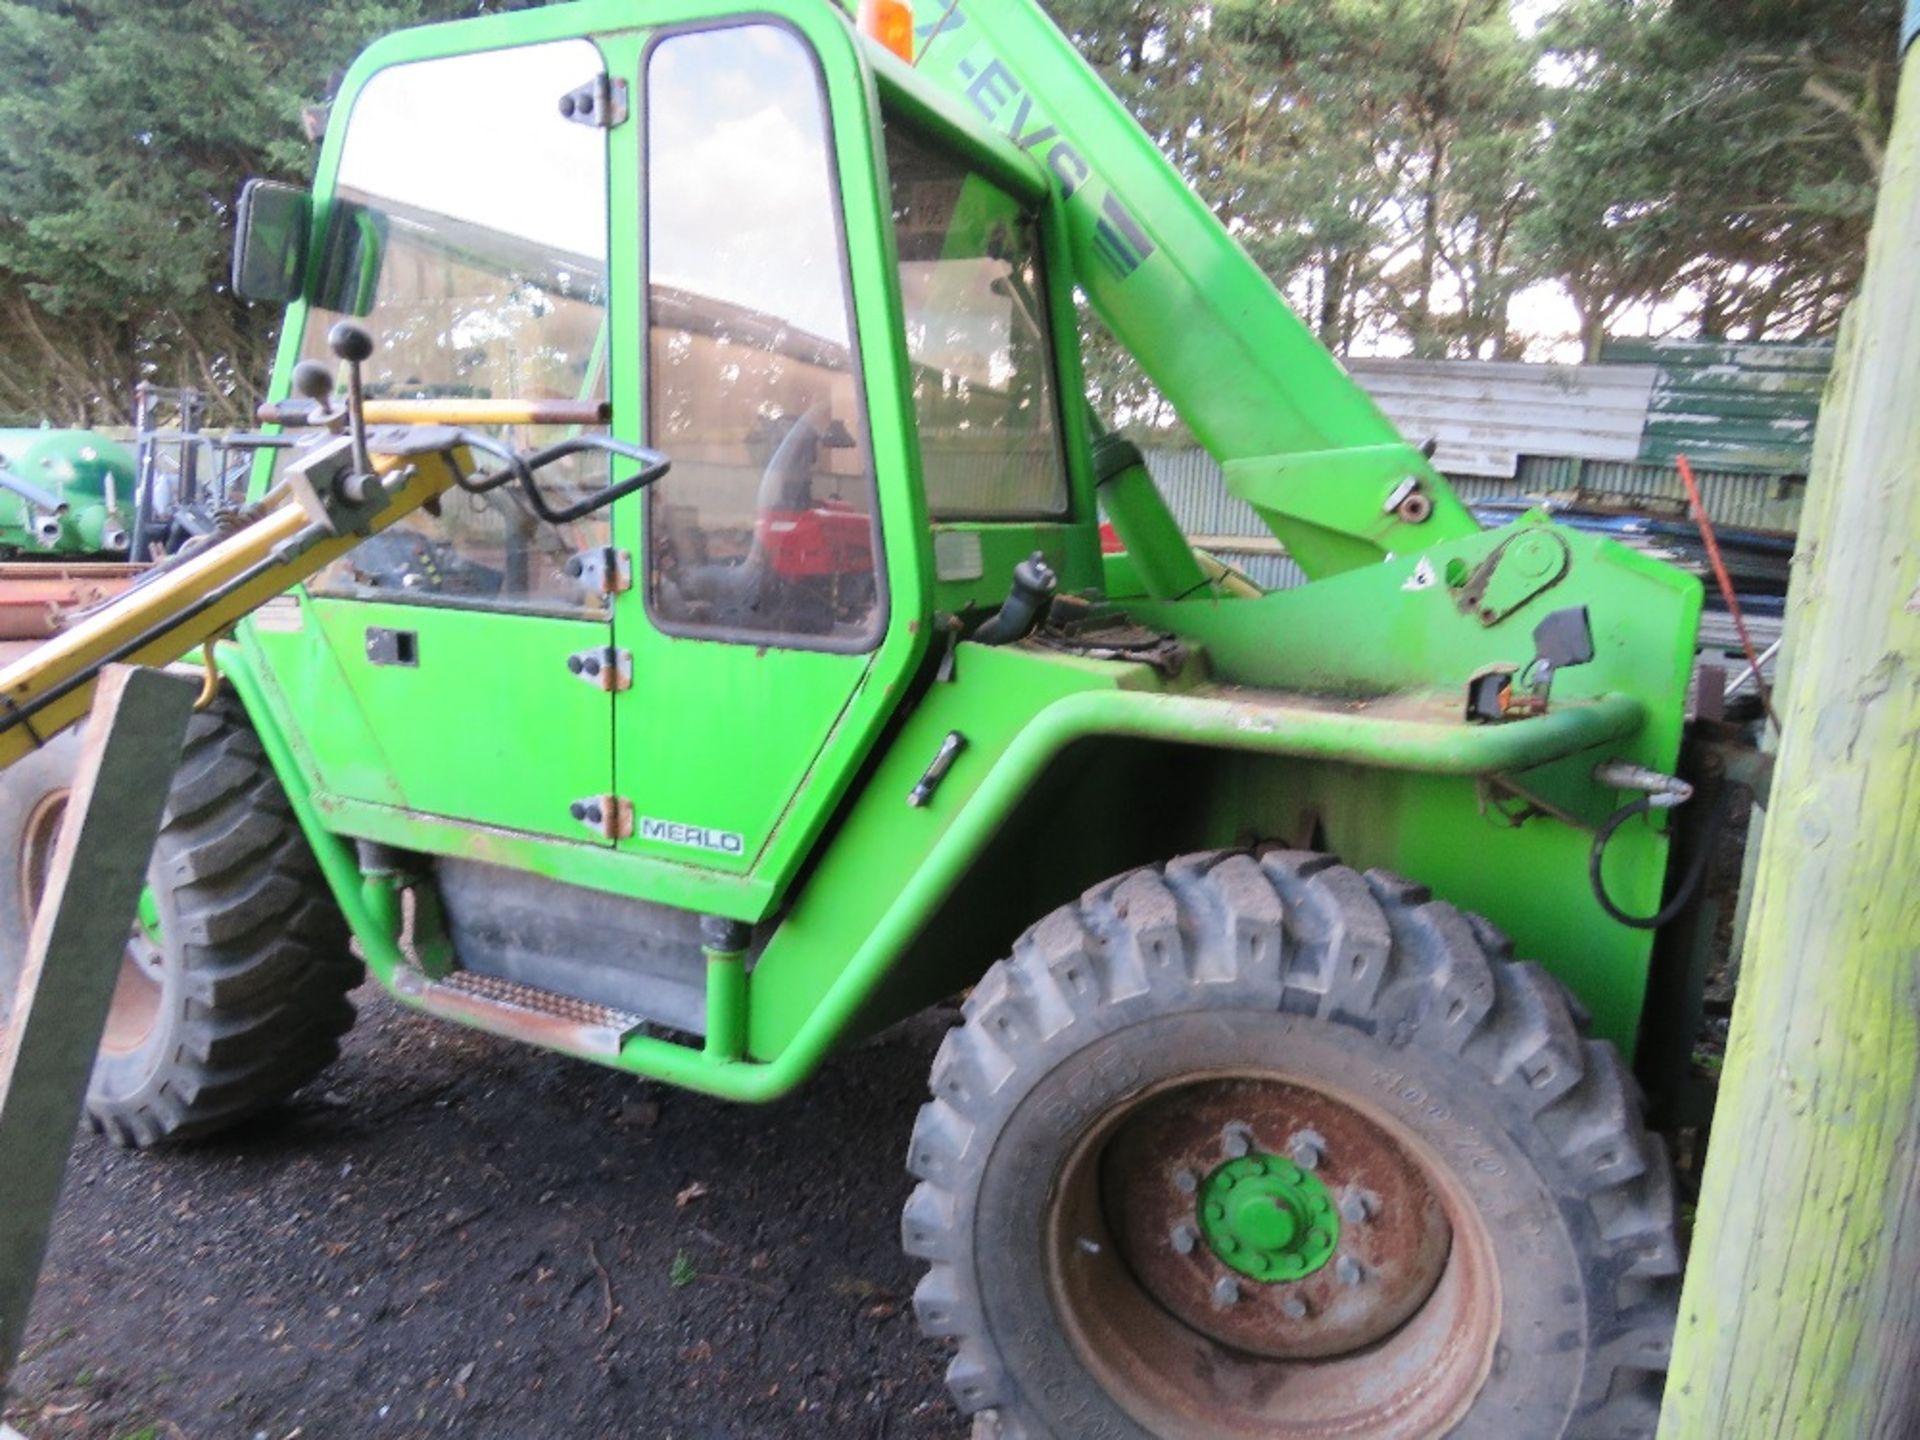 MERLO P27.7EVS TELEHANDLER. 6326 RECORDED HOURS. PERKINS ENGINE. SN: 4111137 DIRECT FROM LOCAL COMPA - Image 7 of 11